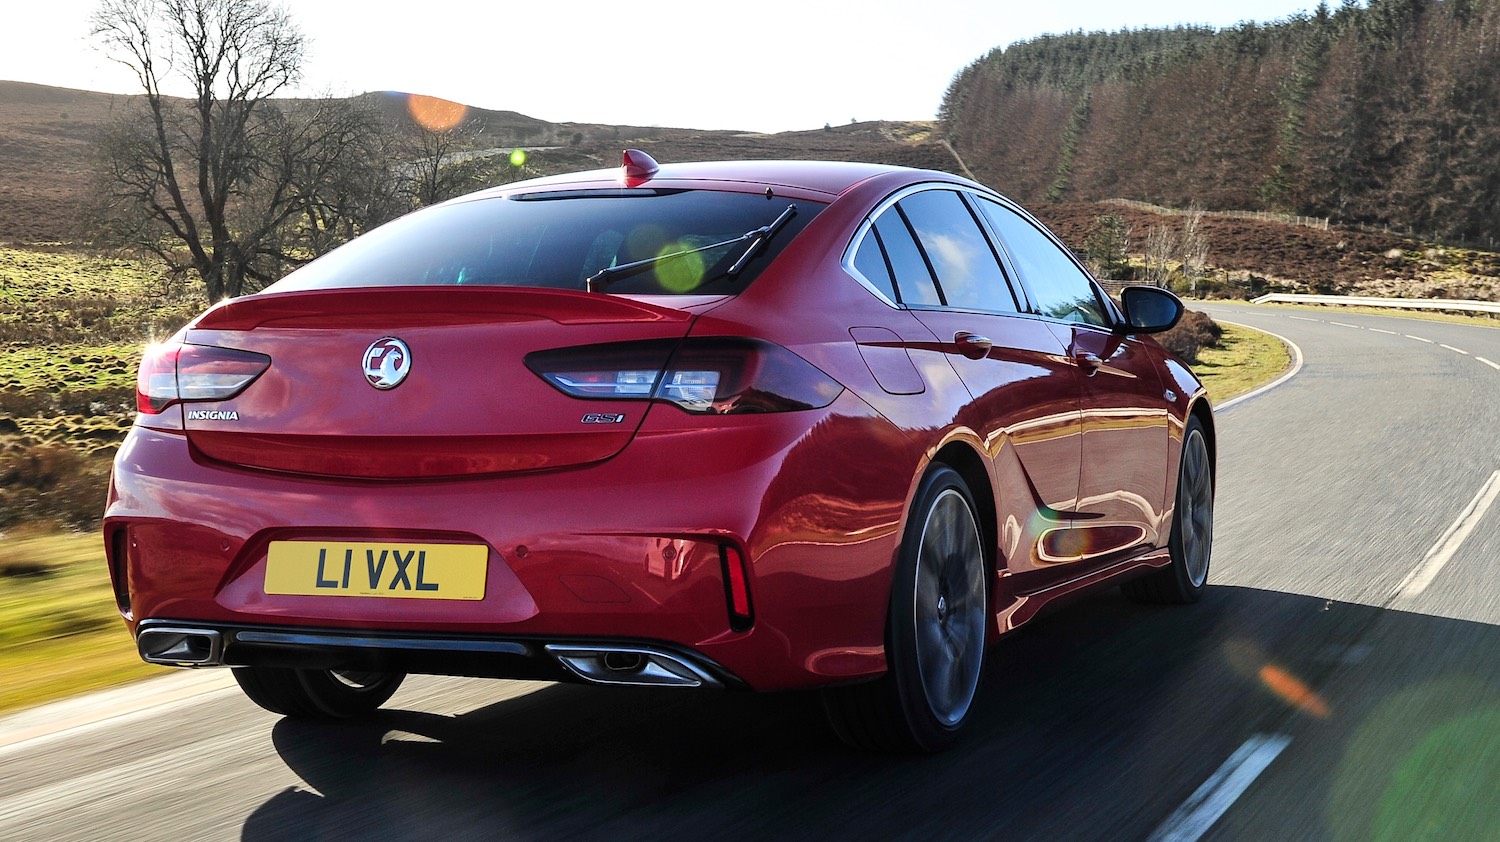 Tom Scanlan reviews the Vauxhall Insignia GSi Sportshatch for Drive 17